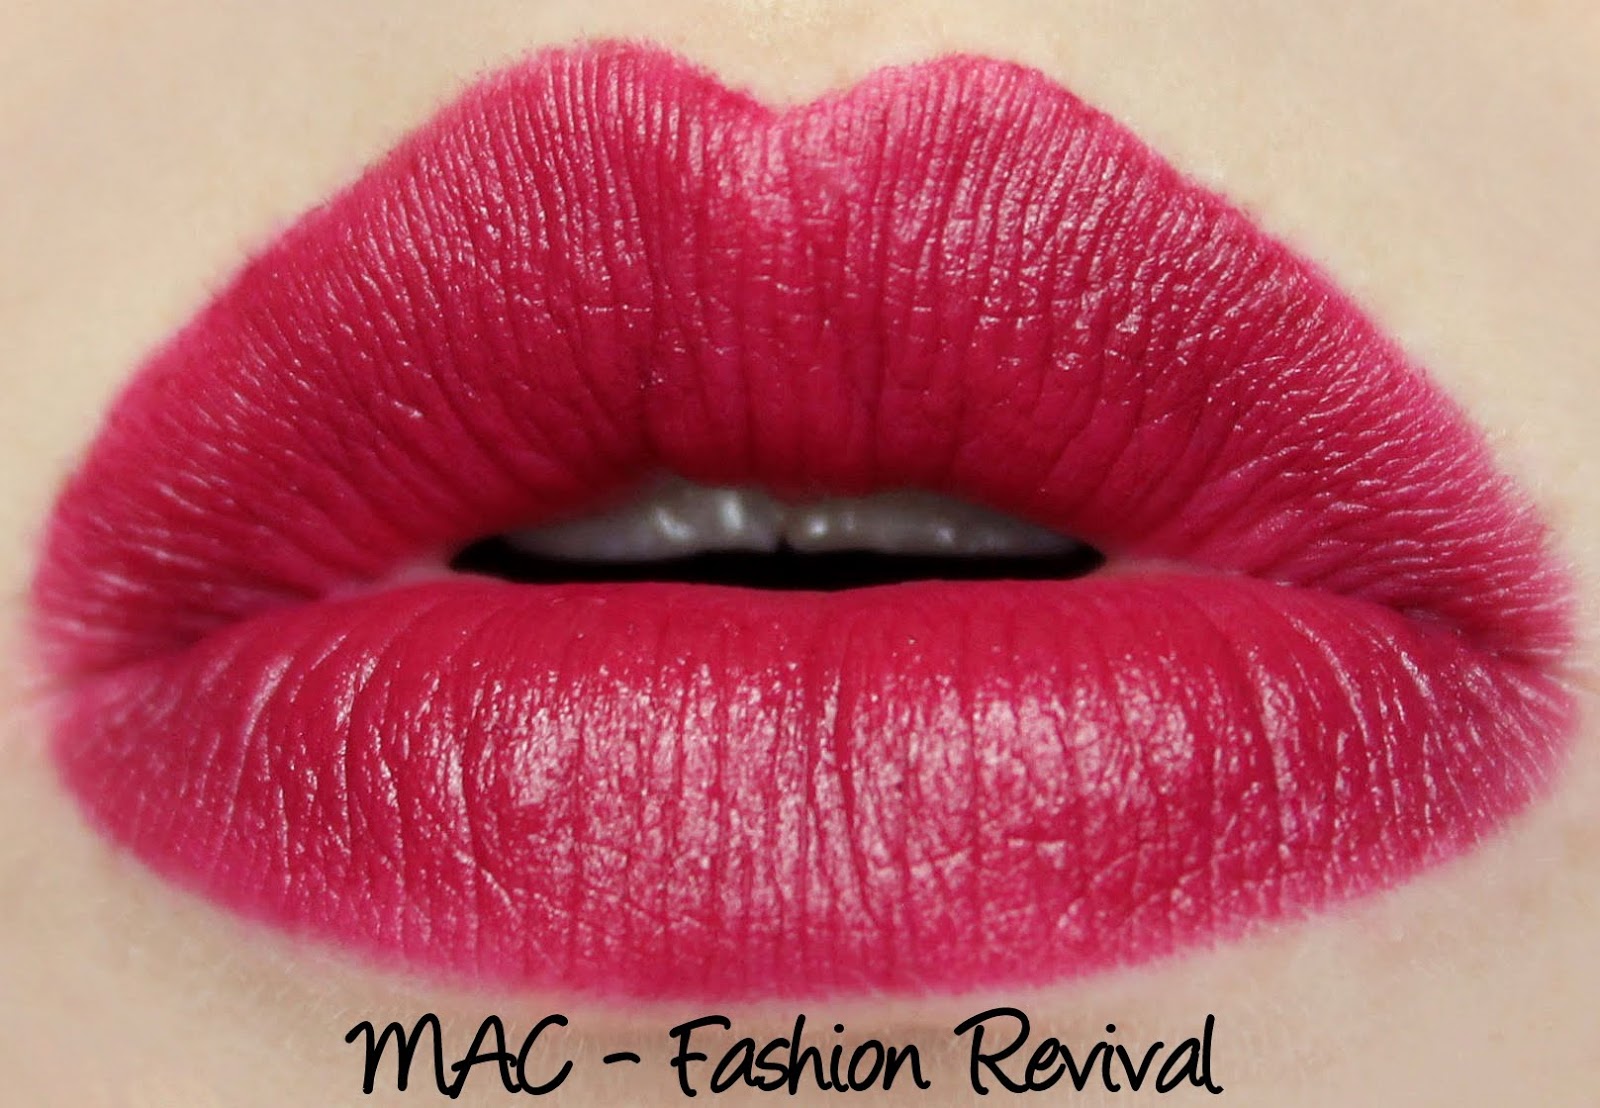 MAC Fashion Revival Lipstick Swatches & Review